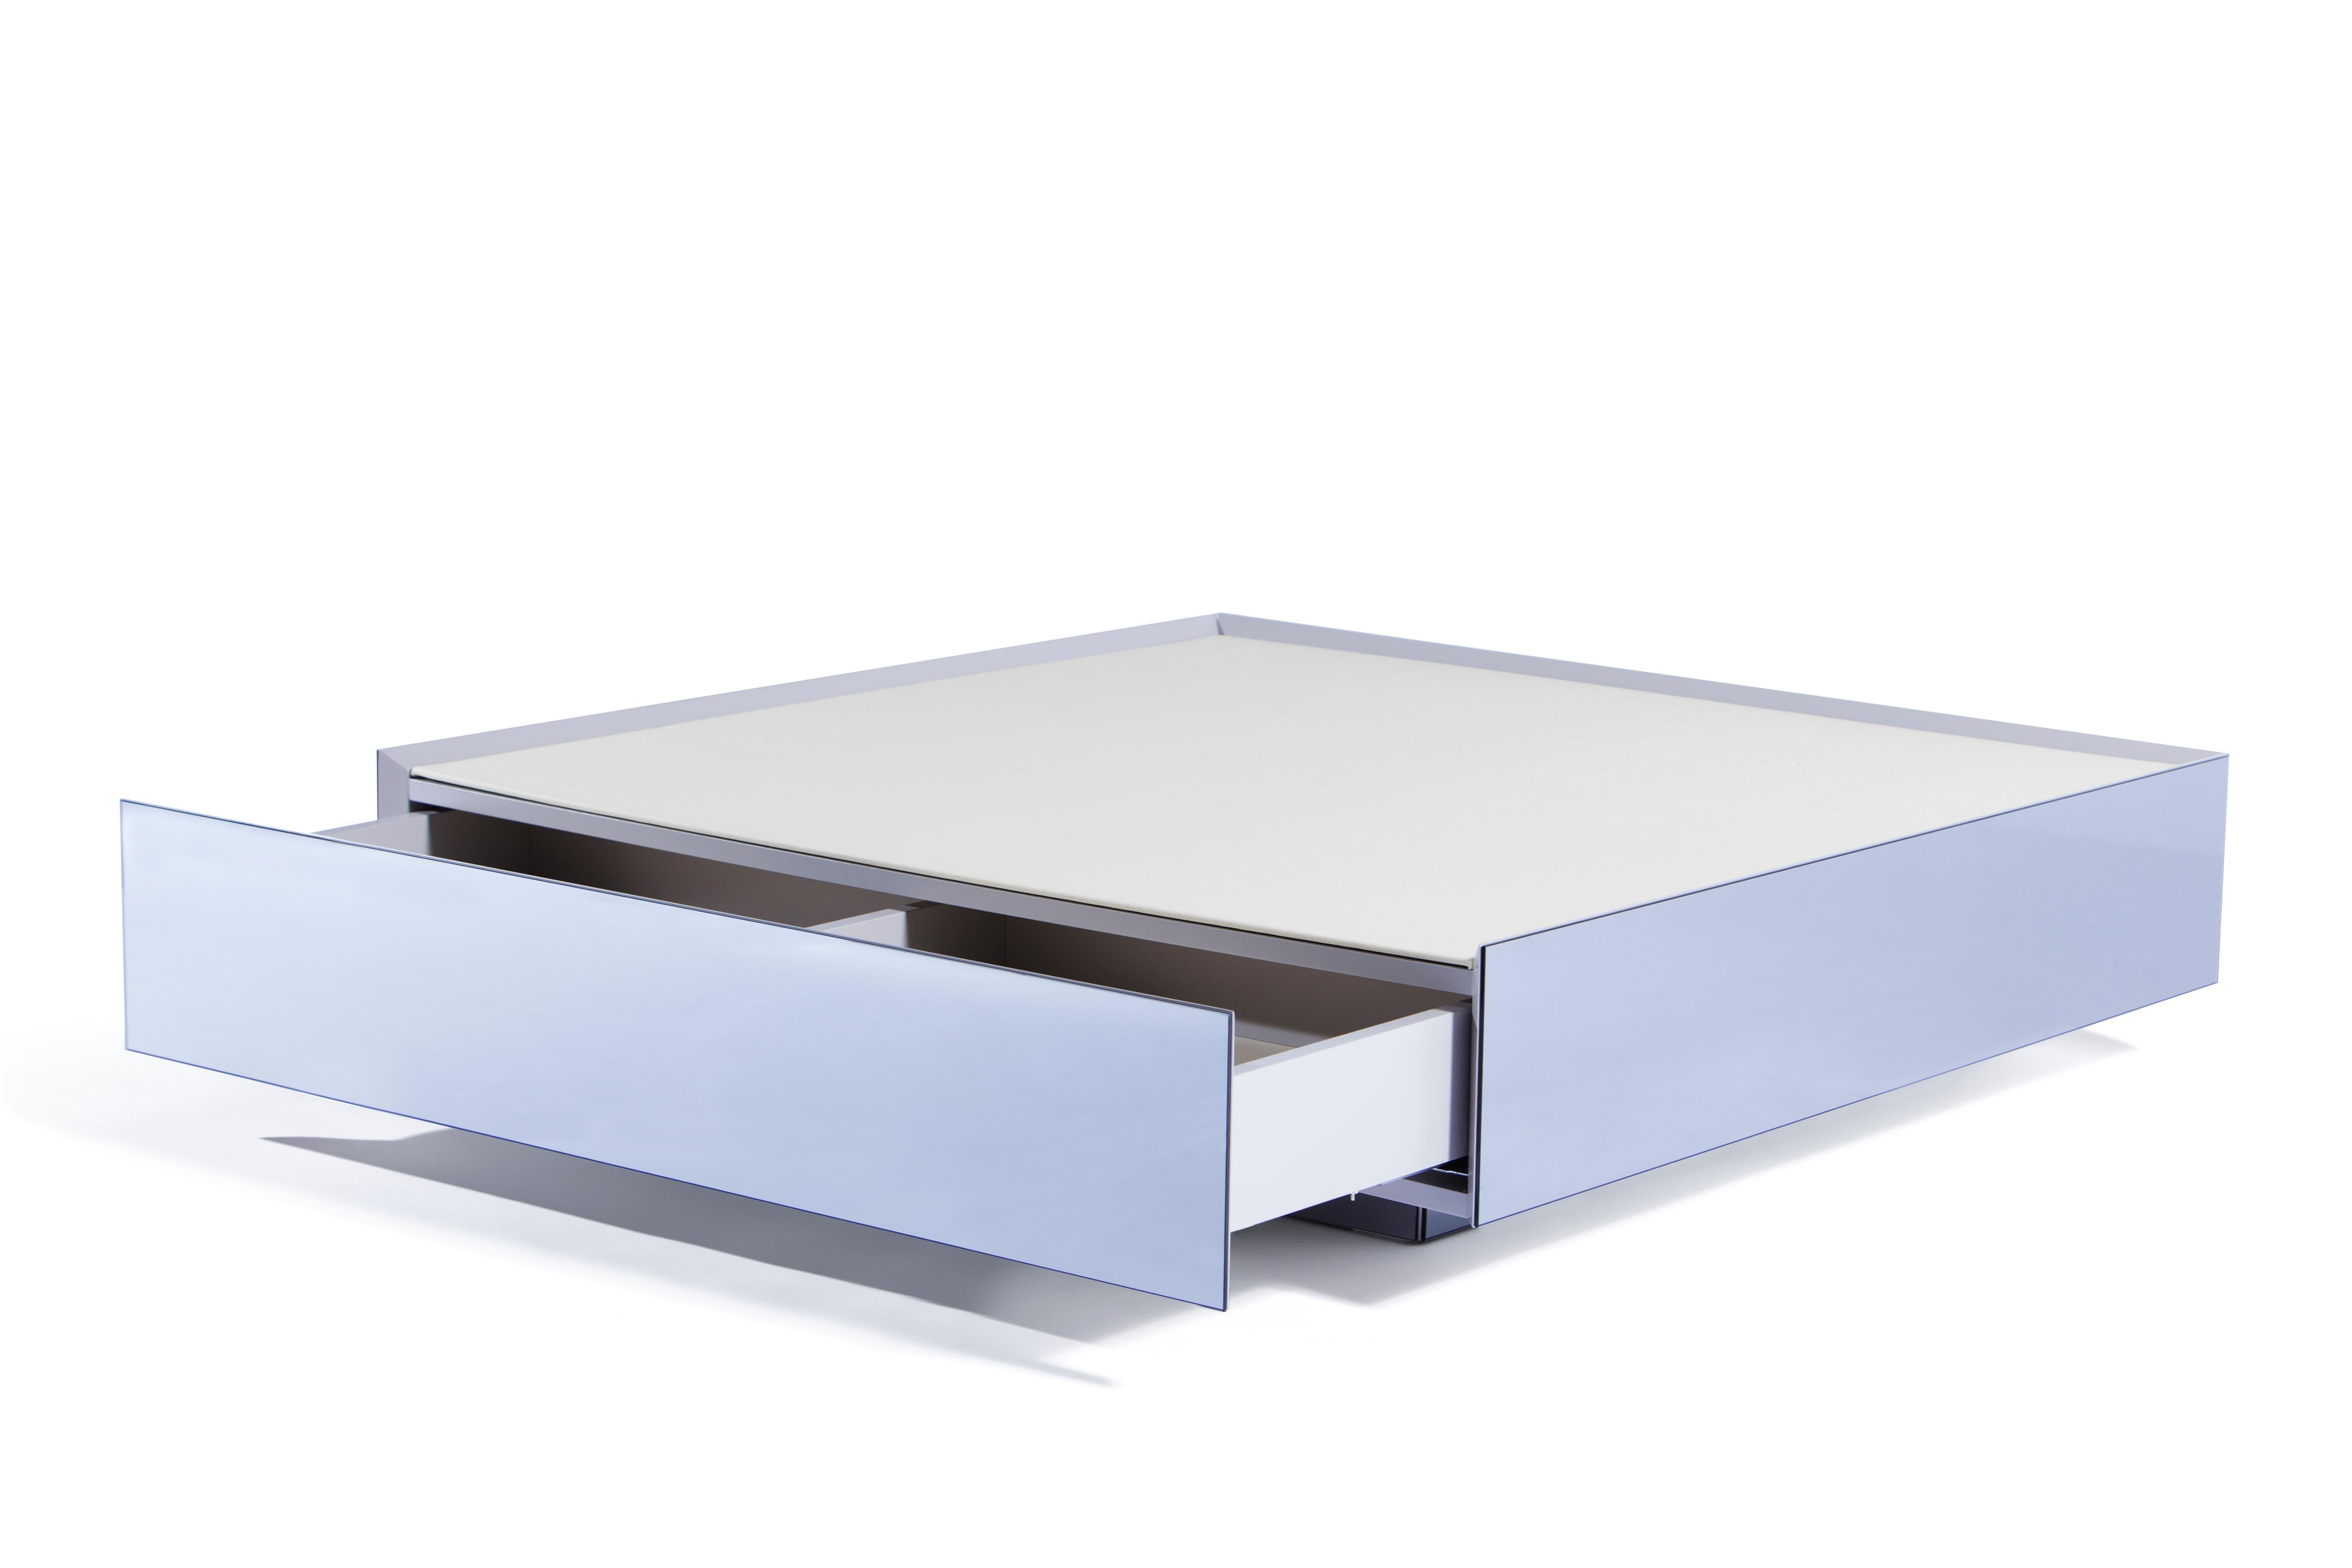 Inspired by a royal chest this clean and representative coffee table bears a secret. A hidden drawer adds to its simplistic yet elegant design a functional component. To personalize it to taste and functionality, the finishes of sides and top can be